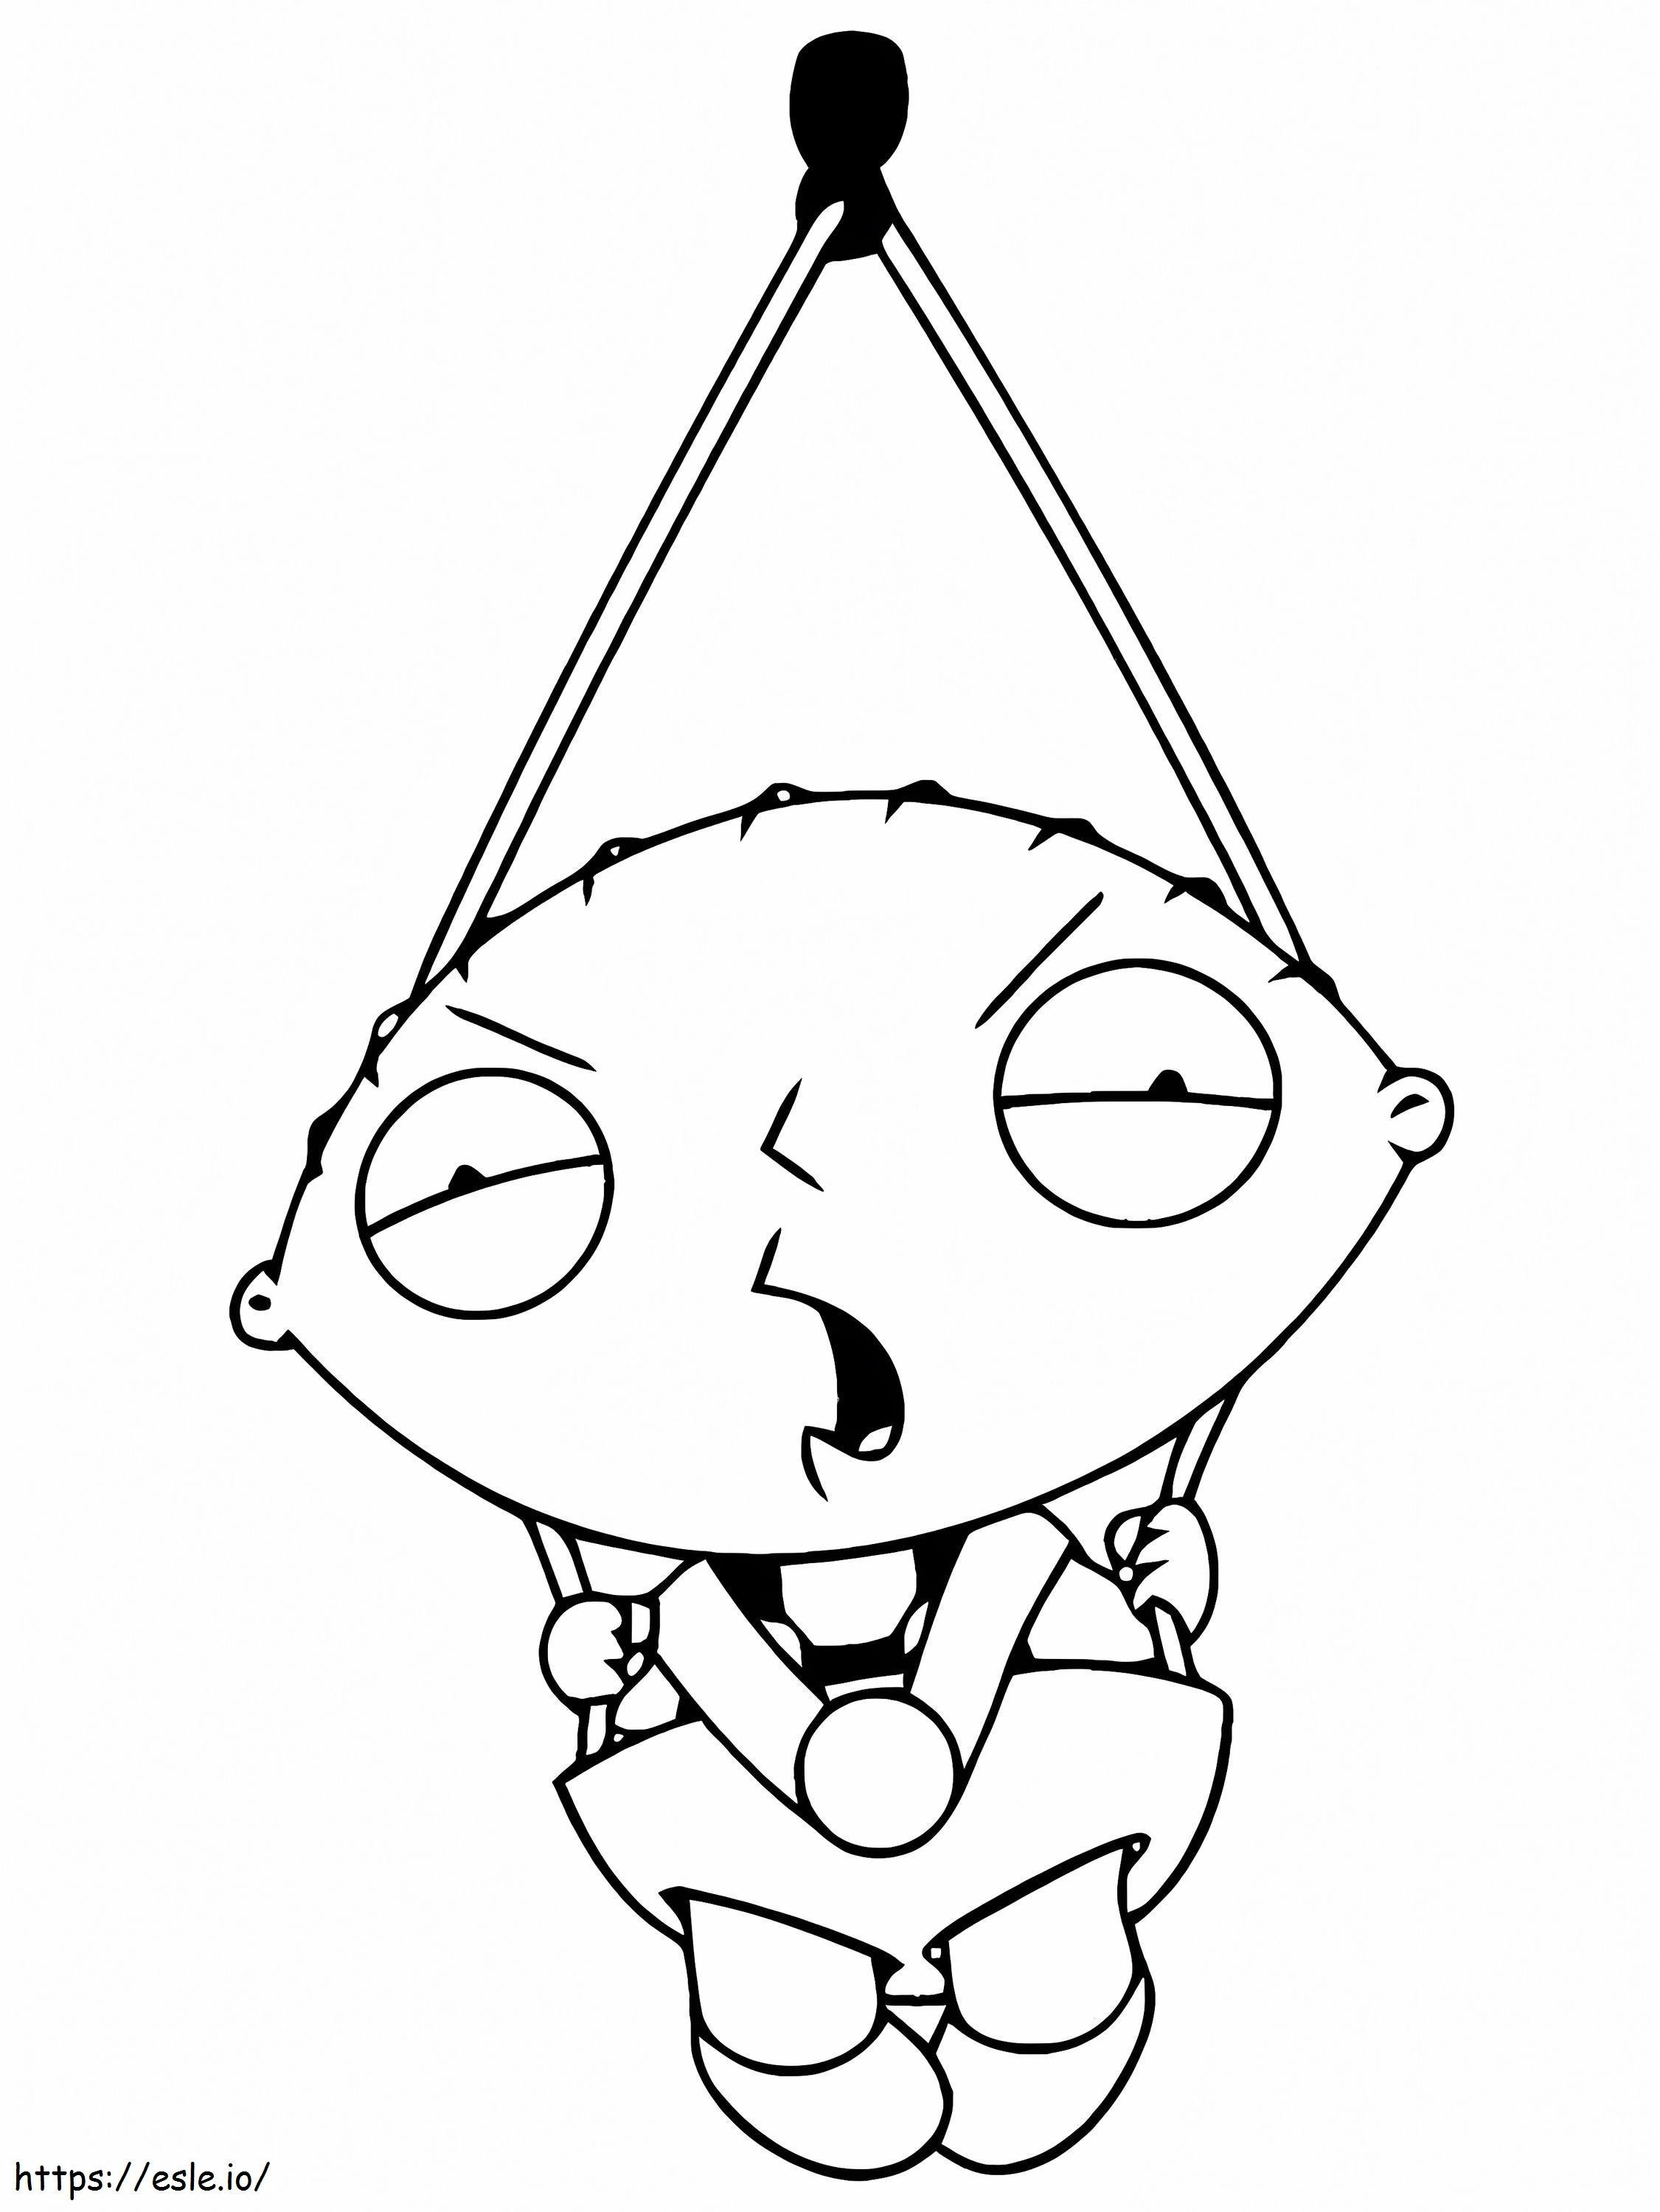 Stewie Griffin 2 coloring page